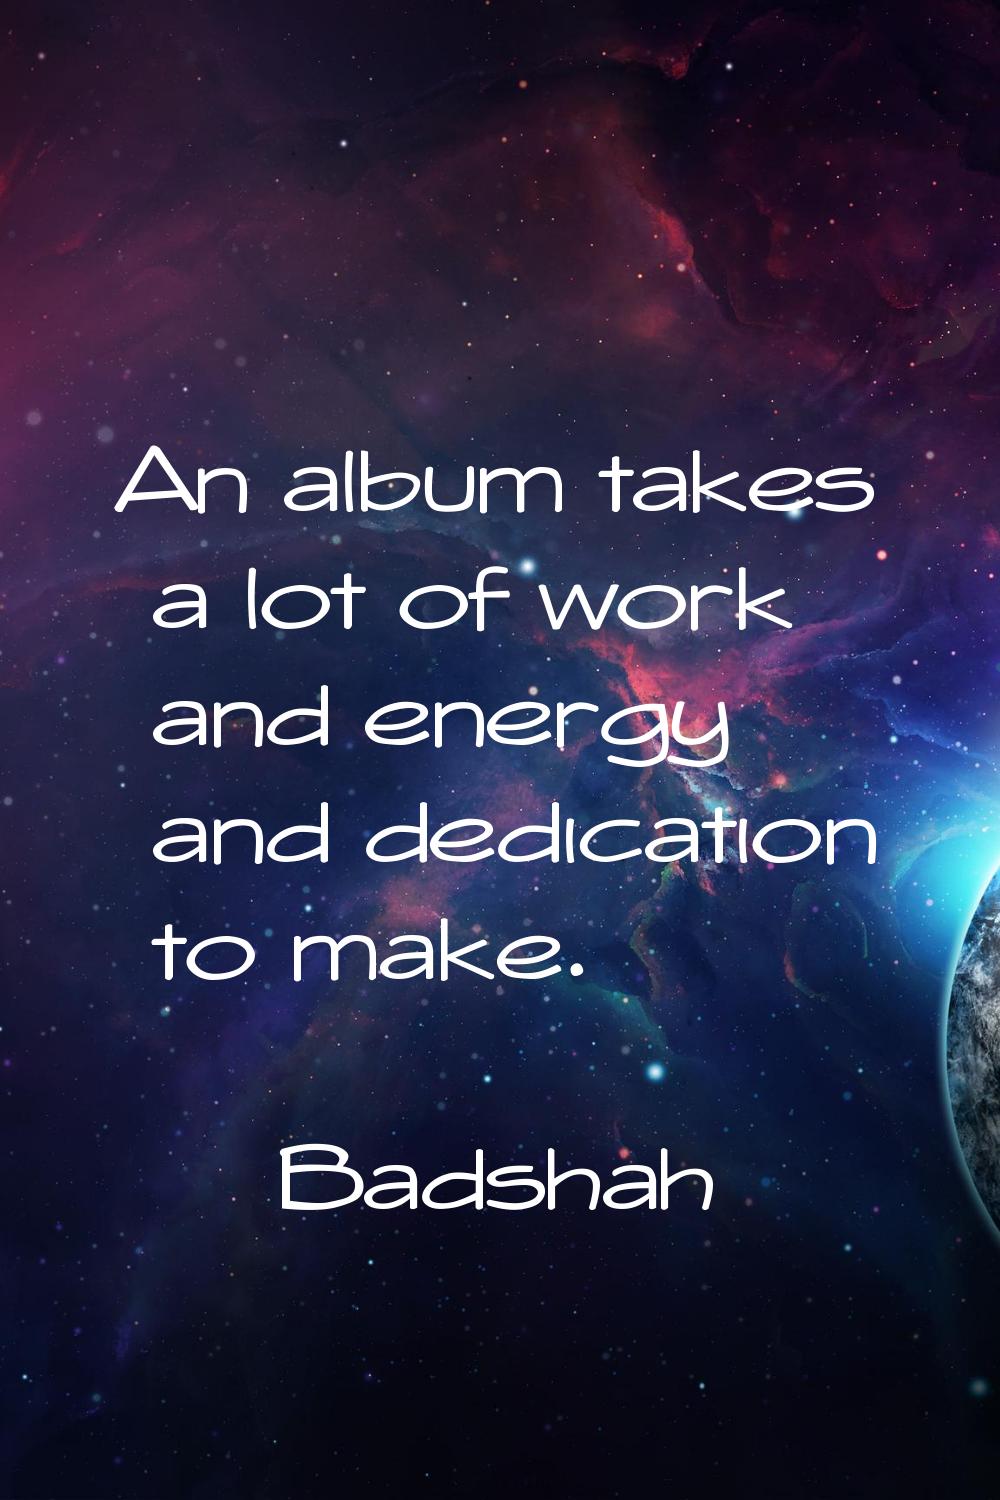 An album takes a lot of work and energy and dedication to make.